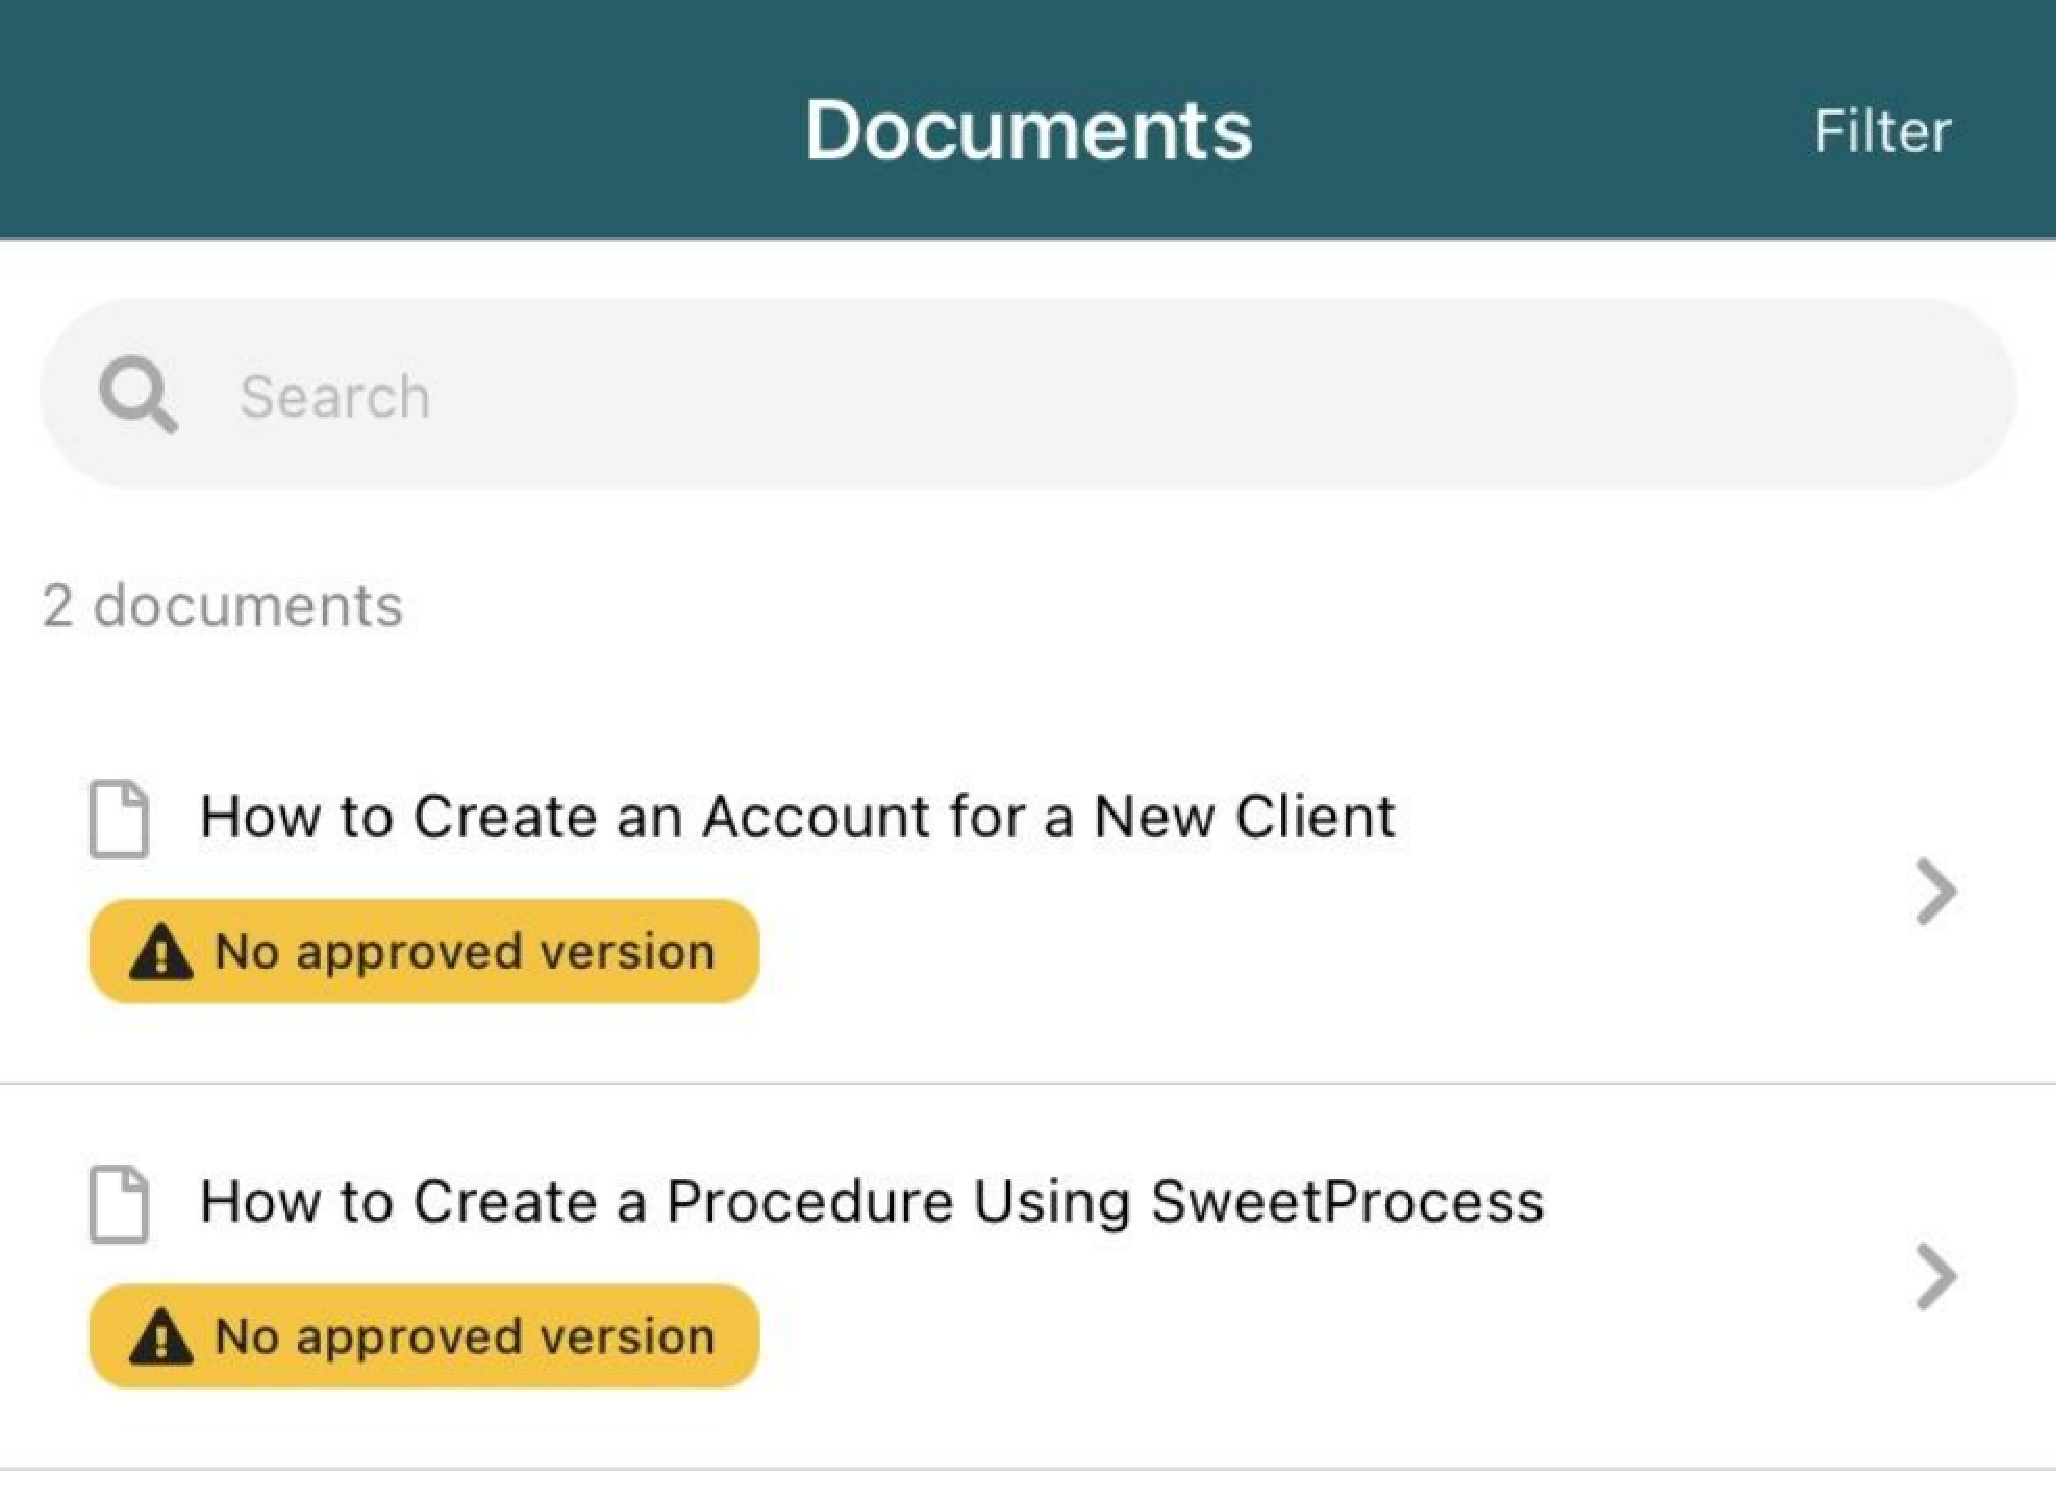 The homepage will display your list of processes under “Documents.” Select one to view its details.